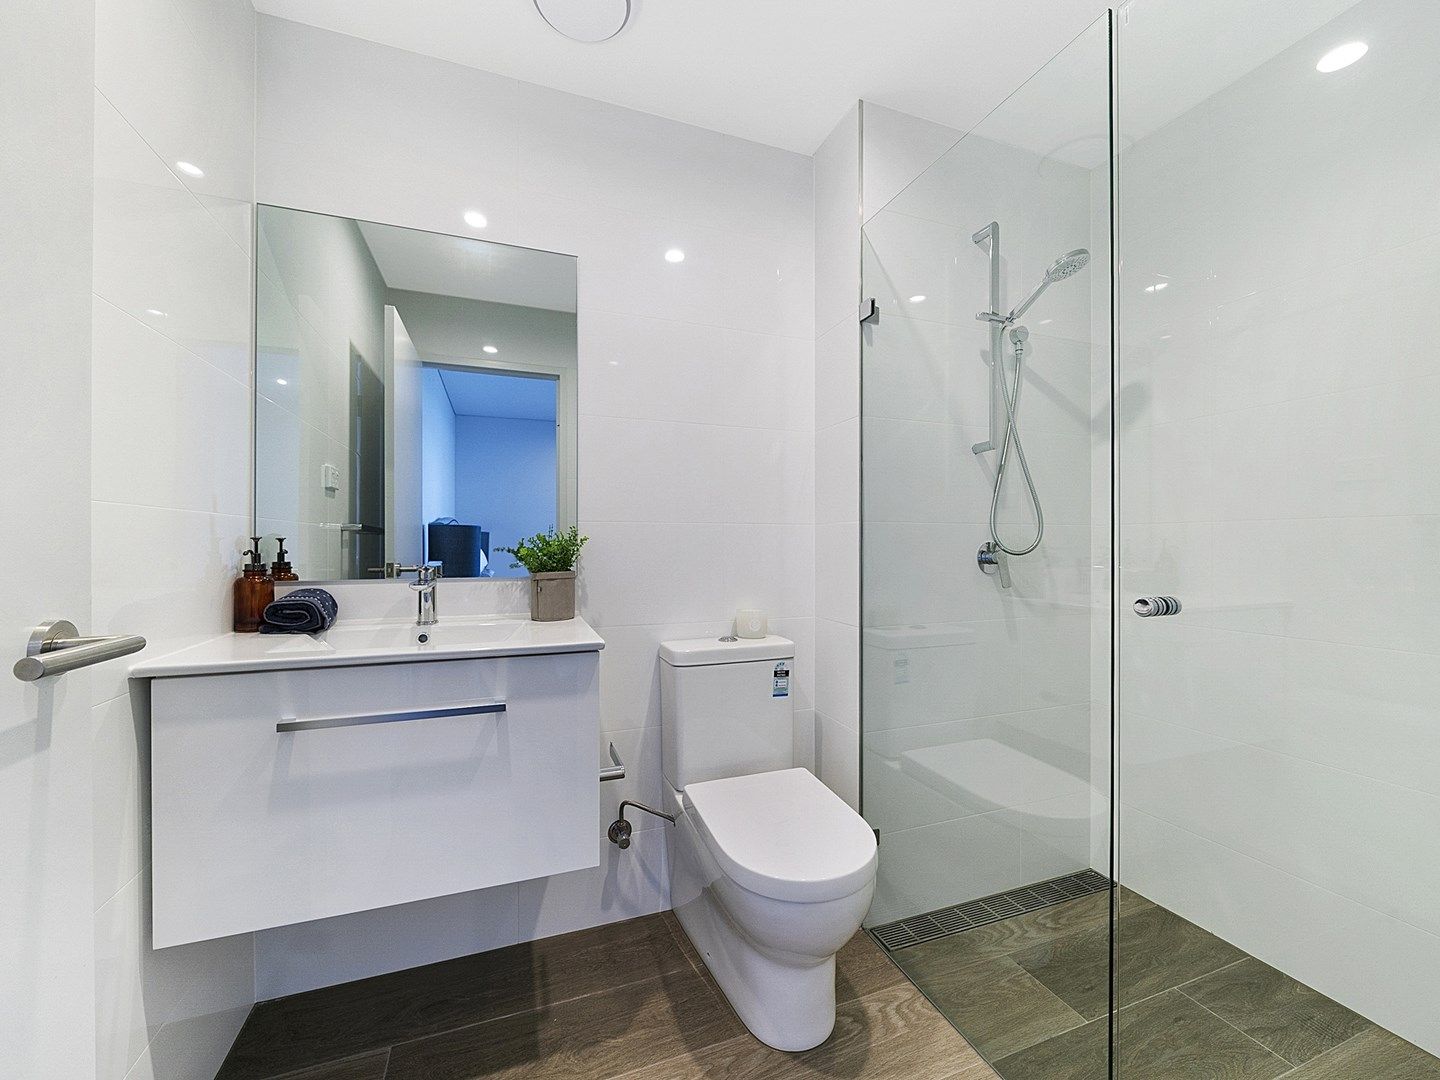 14/2-4 Patricia St, Mays Hill NSW 2145, Image 2